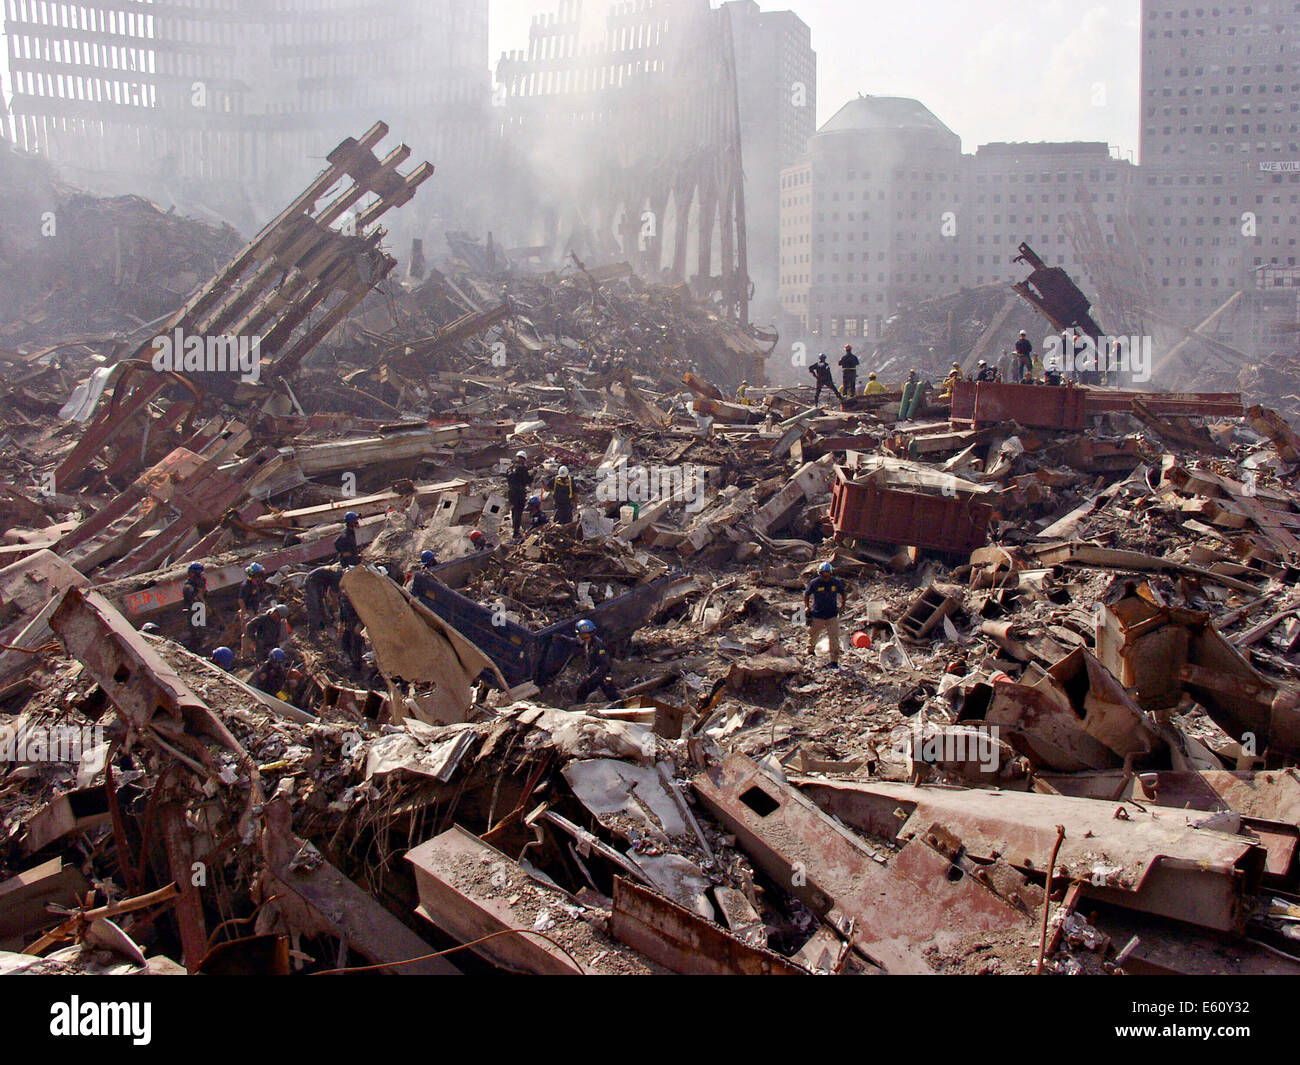 Urban search and rescue teams look through the rubble for victims amongst the wreckage of the World Trade Center in the aftermath of a massive terrorist attack which destroyed the twin towers killing 2,606 people September 21, 2001 in New York, NY. Stock Photo